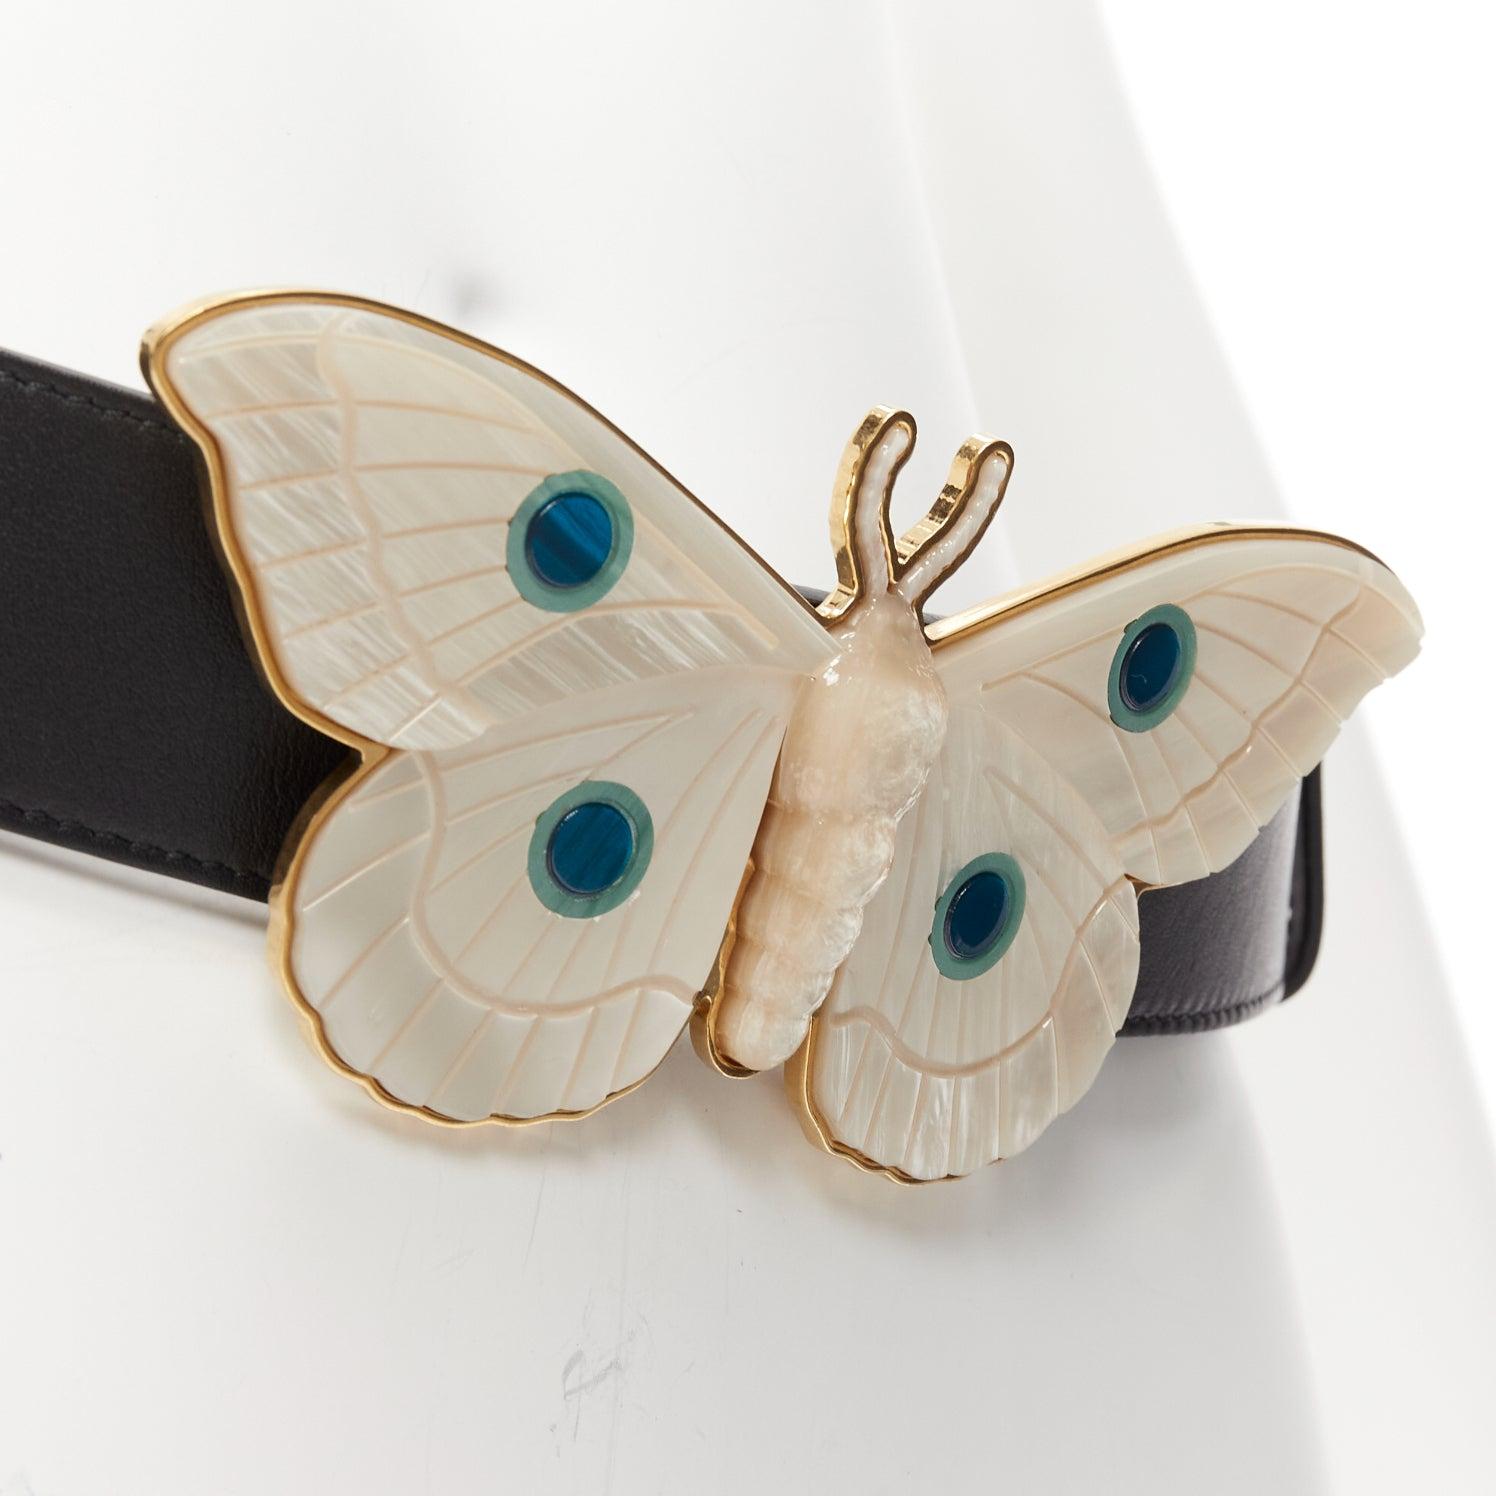 GUCCI Alessandro Michele cream mother of pearl butterfly black leather belt 75cm
Reference: AAWC/A01204
Brand: Gucci
Designer: Alessandro Michele
Material: Leather, Pearl
Color: Black, Cream
Pattern: Solid
Closure: Belt
Lining: Black Leather
Extra